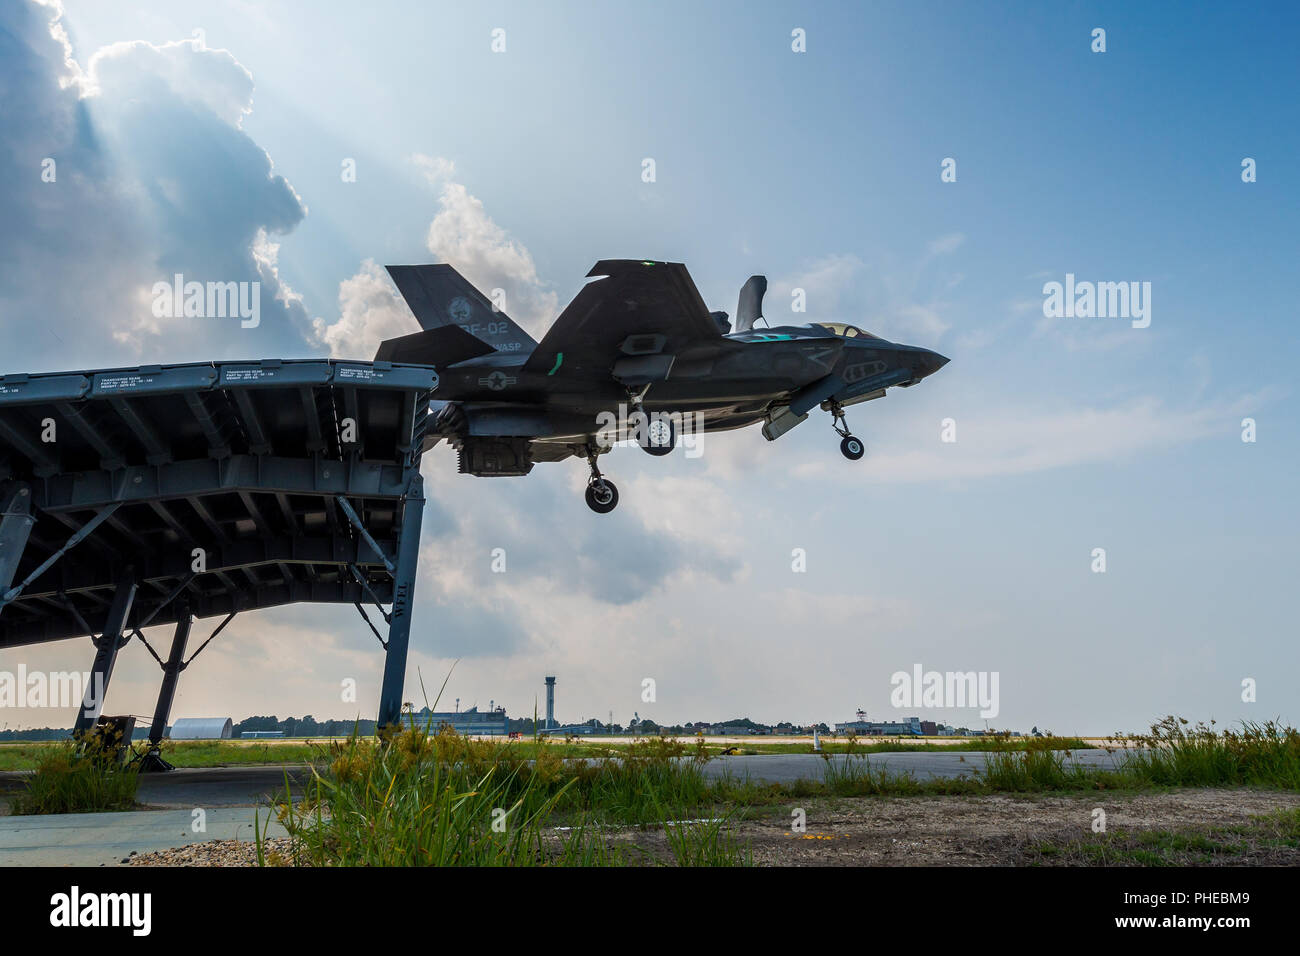 U.S. Marine Corps Maj. Michael Lippert and Royal Air Force Sq. Ldr. Andy Edgell, both F-35 Pax River ITF test pilots, conduct ski jumps and field carrier landing practices with F-35Bs on Aug. 27, 2018, at NAS Patuxent River as part of the workups for the First of Class Flight Trials aboard the HMS Queen Elizabeth.  Around 200 supporting staff from the ITF, including pilots, engineers, maintainers and data analysts, will take two F-35Bs test aircraft aboard HMS Queen Elizabeth this fall to evaluate the fifth-generation aircraft performance and integration with Royal Navy’s newest aircraft carri Stock Photo